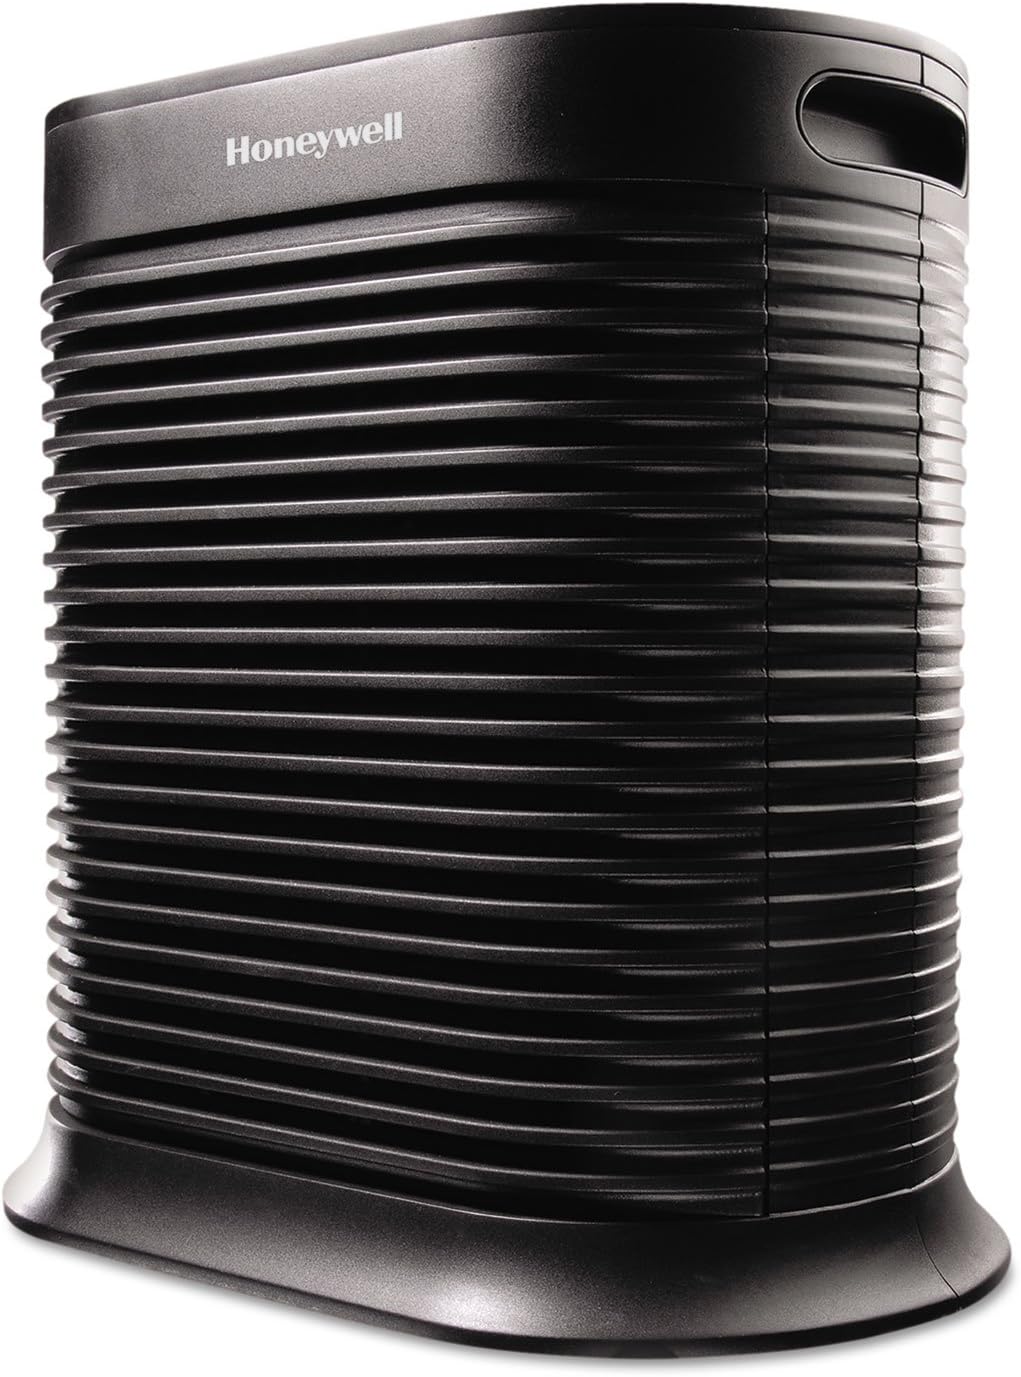 Honeywell HPA300 HEPA Air Purifier for Extra Large Rooms